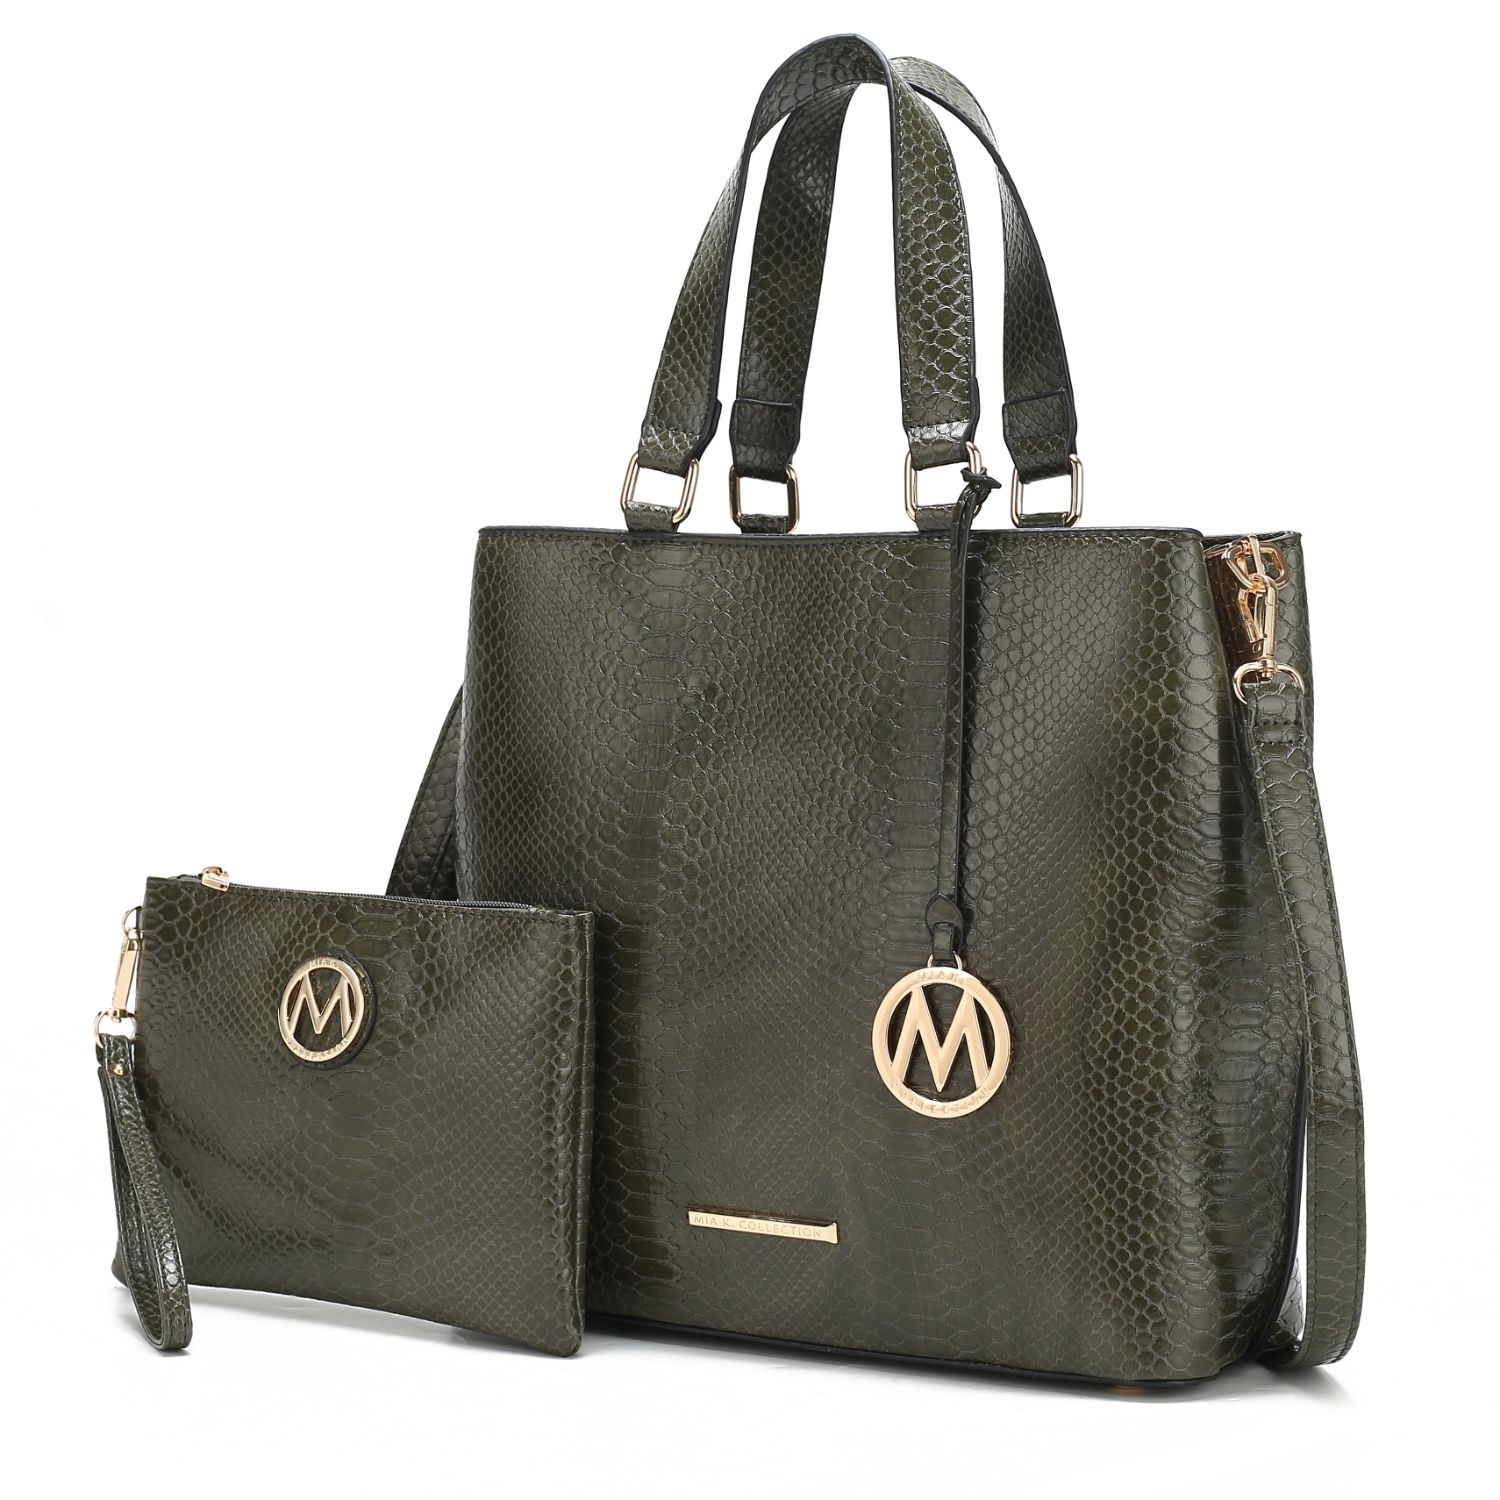 MKF Collection Beryl Snake-embossed Vegan Leather Women's Tote Handbag With Wristlet - 2 Pieces, By Mia K - Red